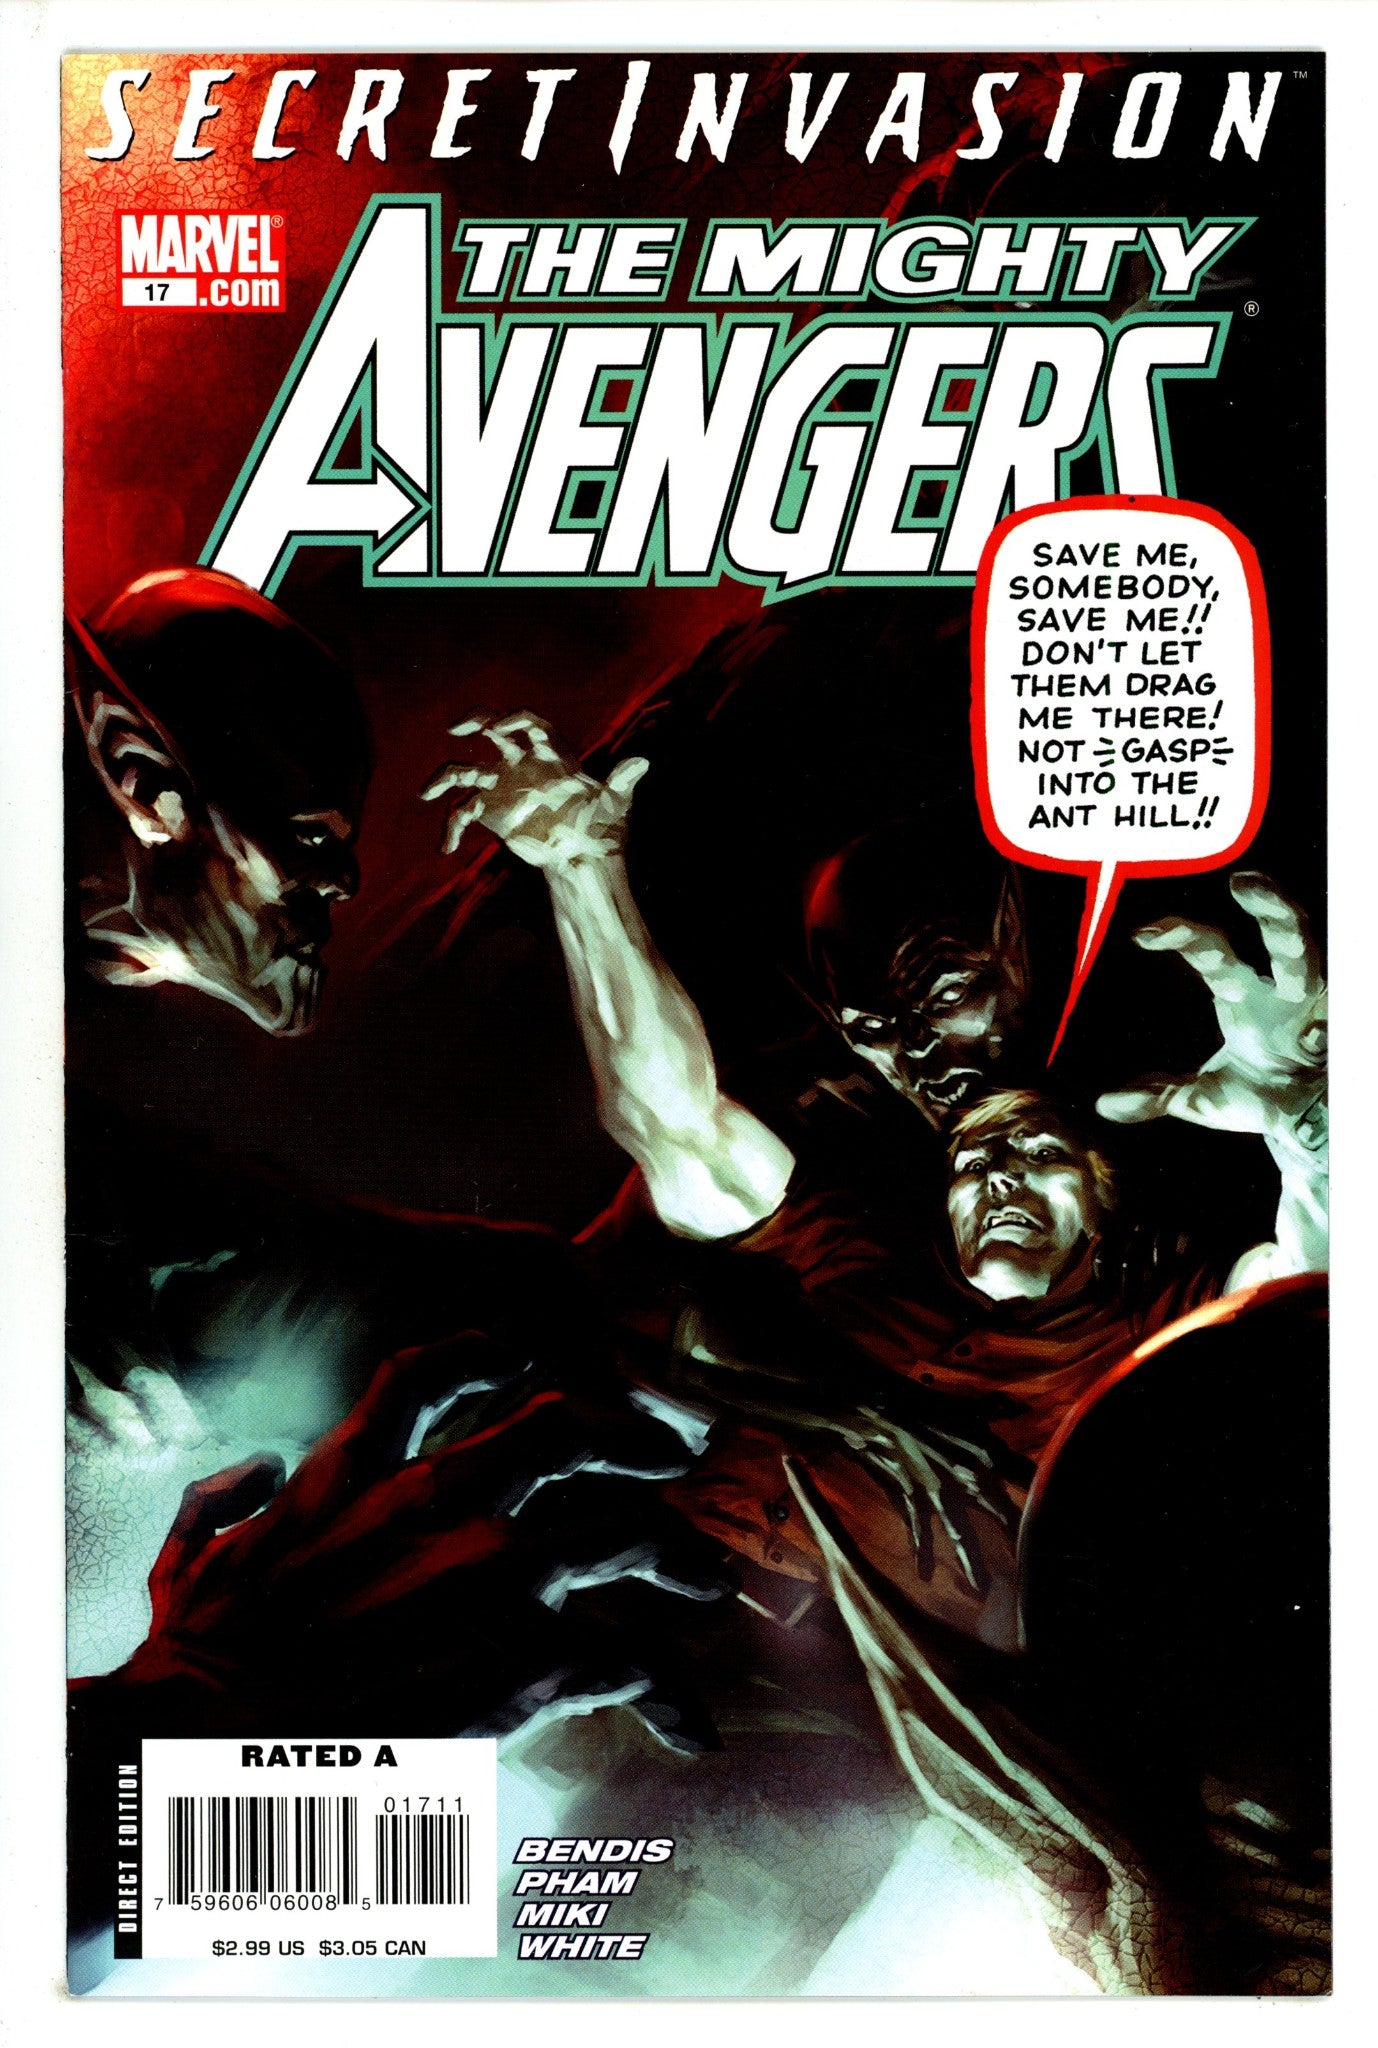 The Mighty Avengers Vol 1 17 High Grade (2008) 